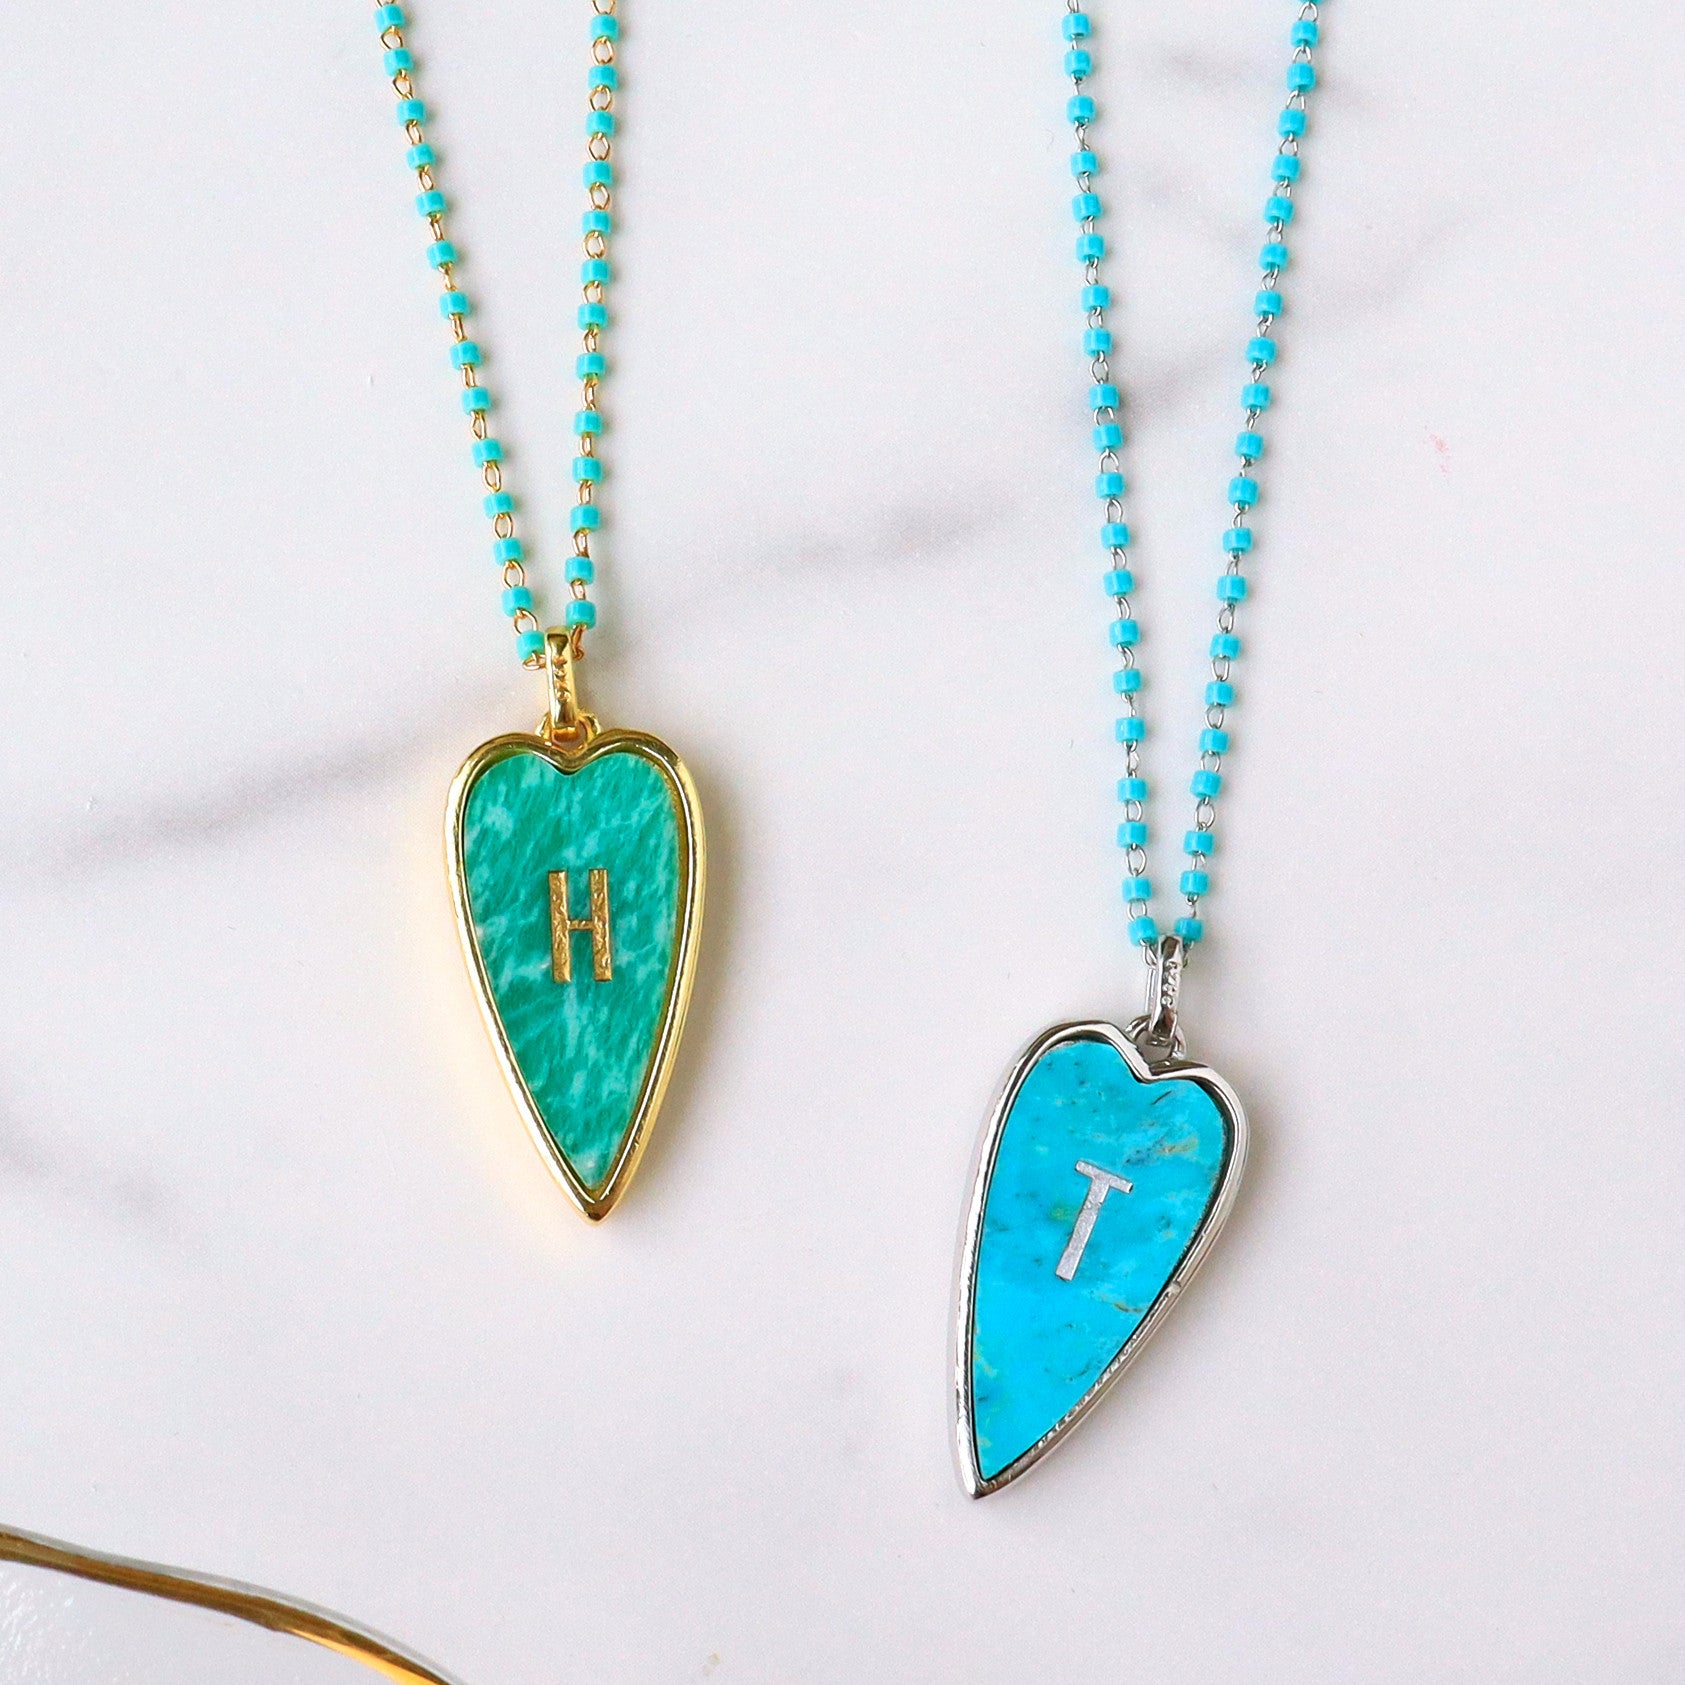 Gold/Silver Plated Natural Gemstone Heart Necklace, Carved Letter, Rosary Chain, Natural Amazonite Genuine Turquoise Heart Necklace, Love Jewelry KZ030